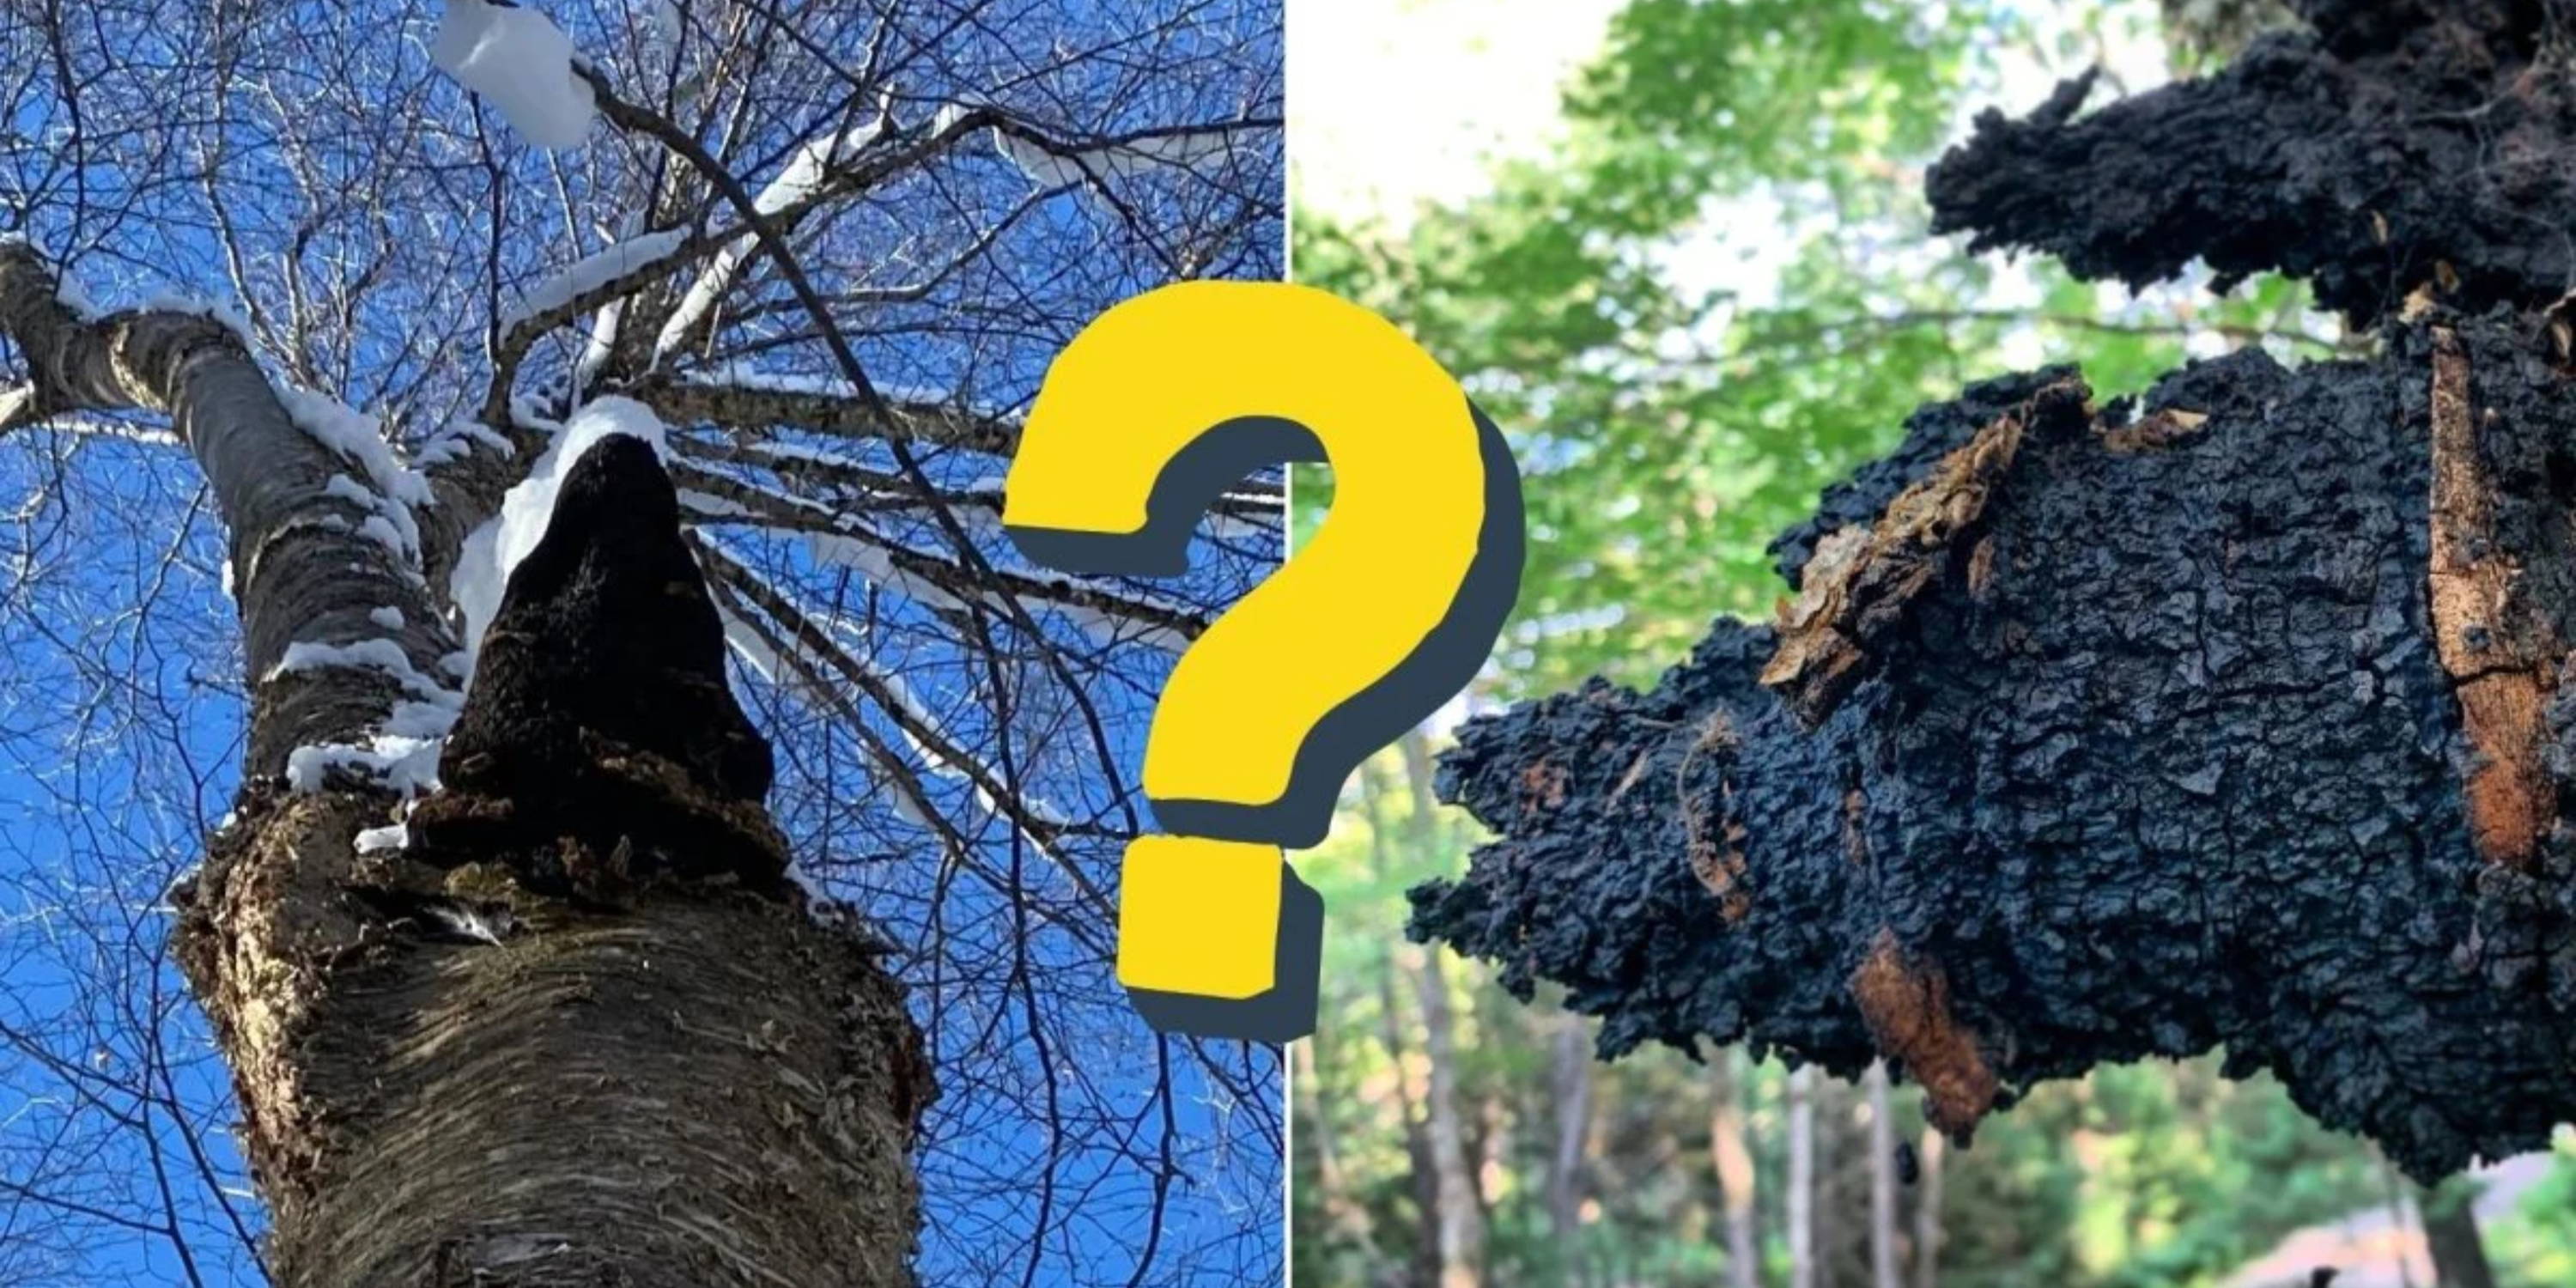 A live chaga conk on a birch tree in the winter on the left, on the right a summer Chaga conk . In between the two images is a question mark.